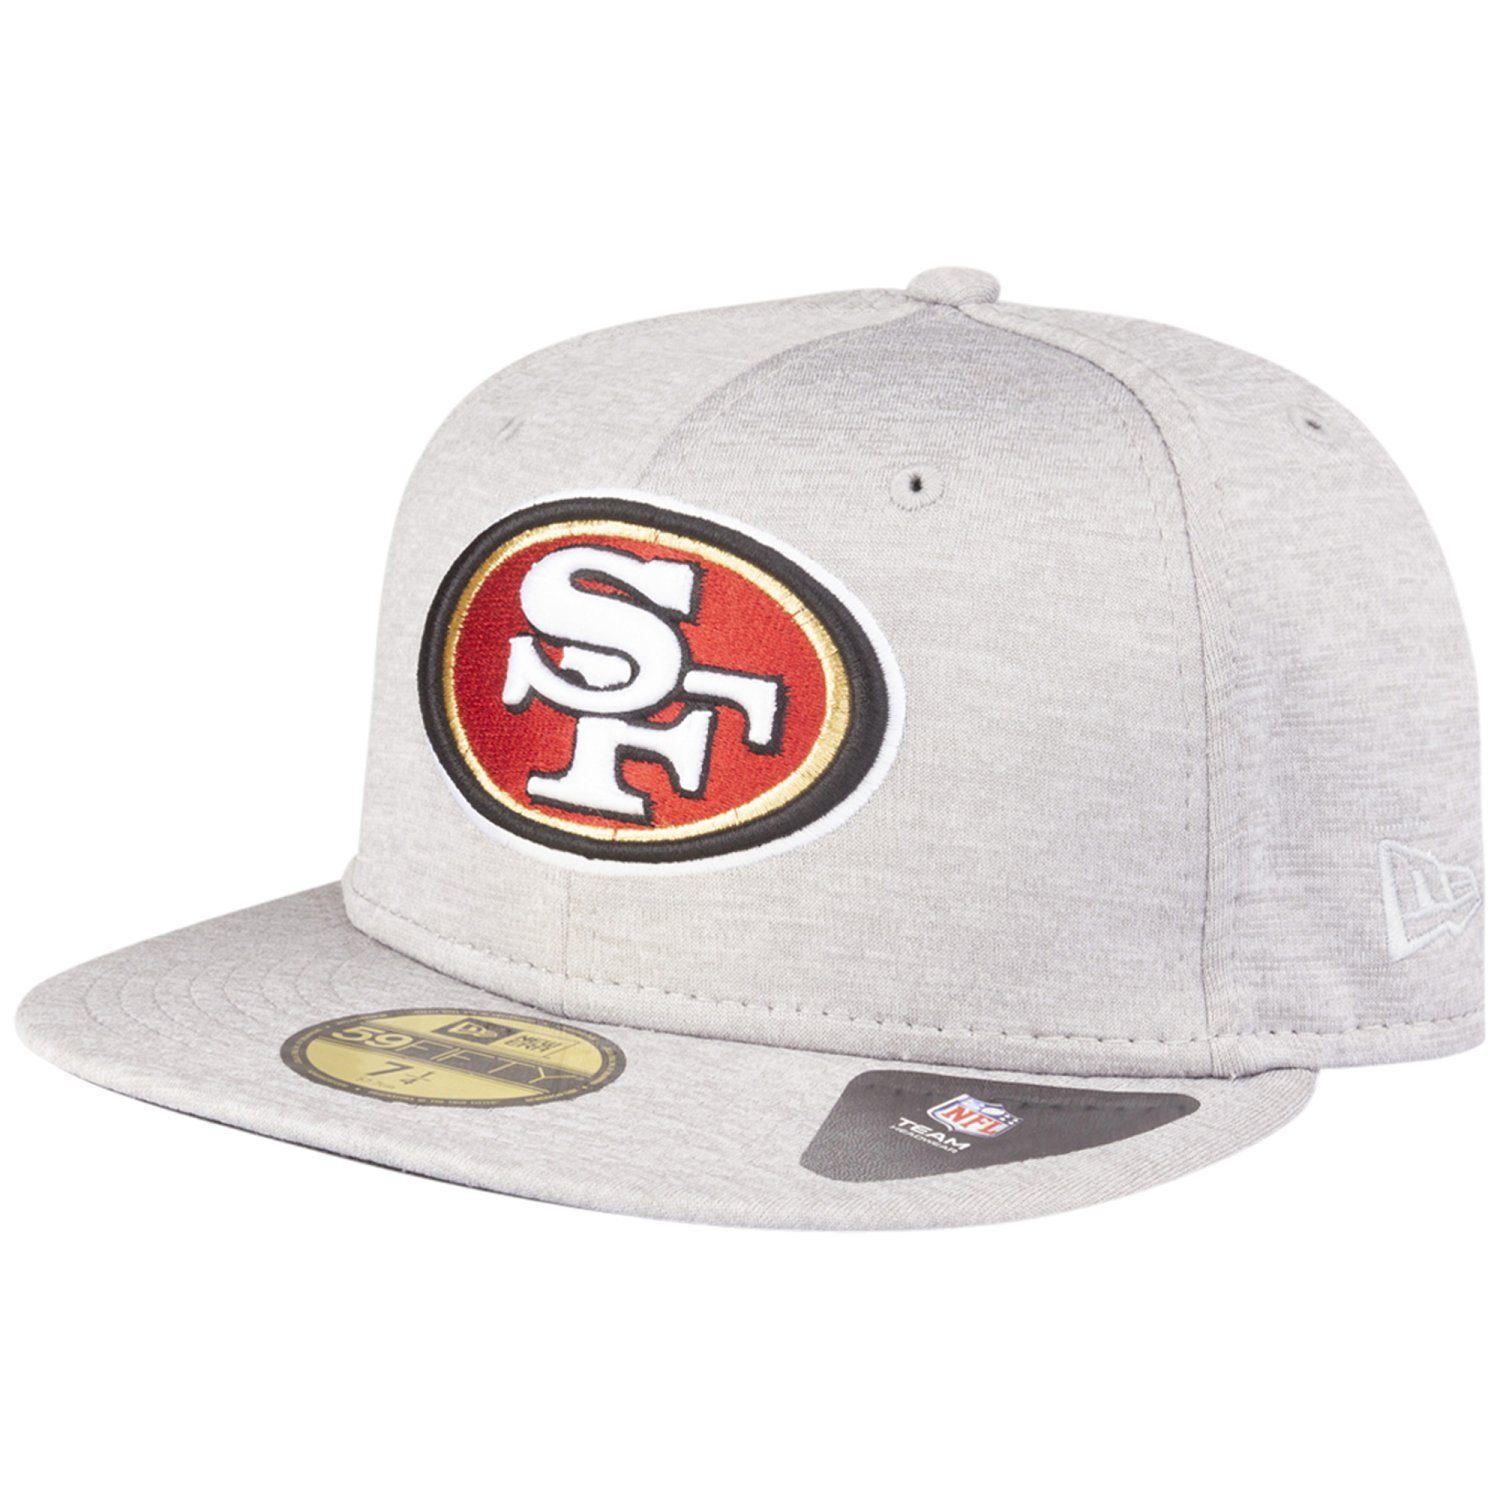 New Era Fitted Cap 59Fifty SHADOW TECH San Francisco 49ers